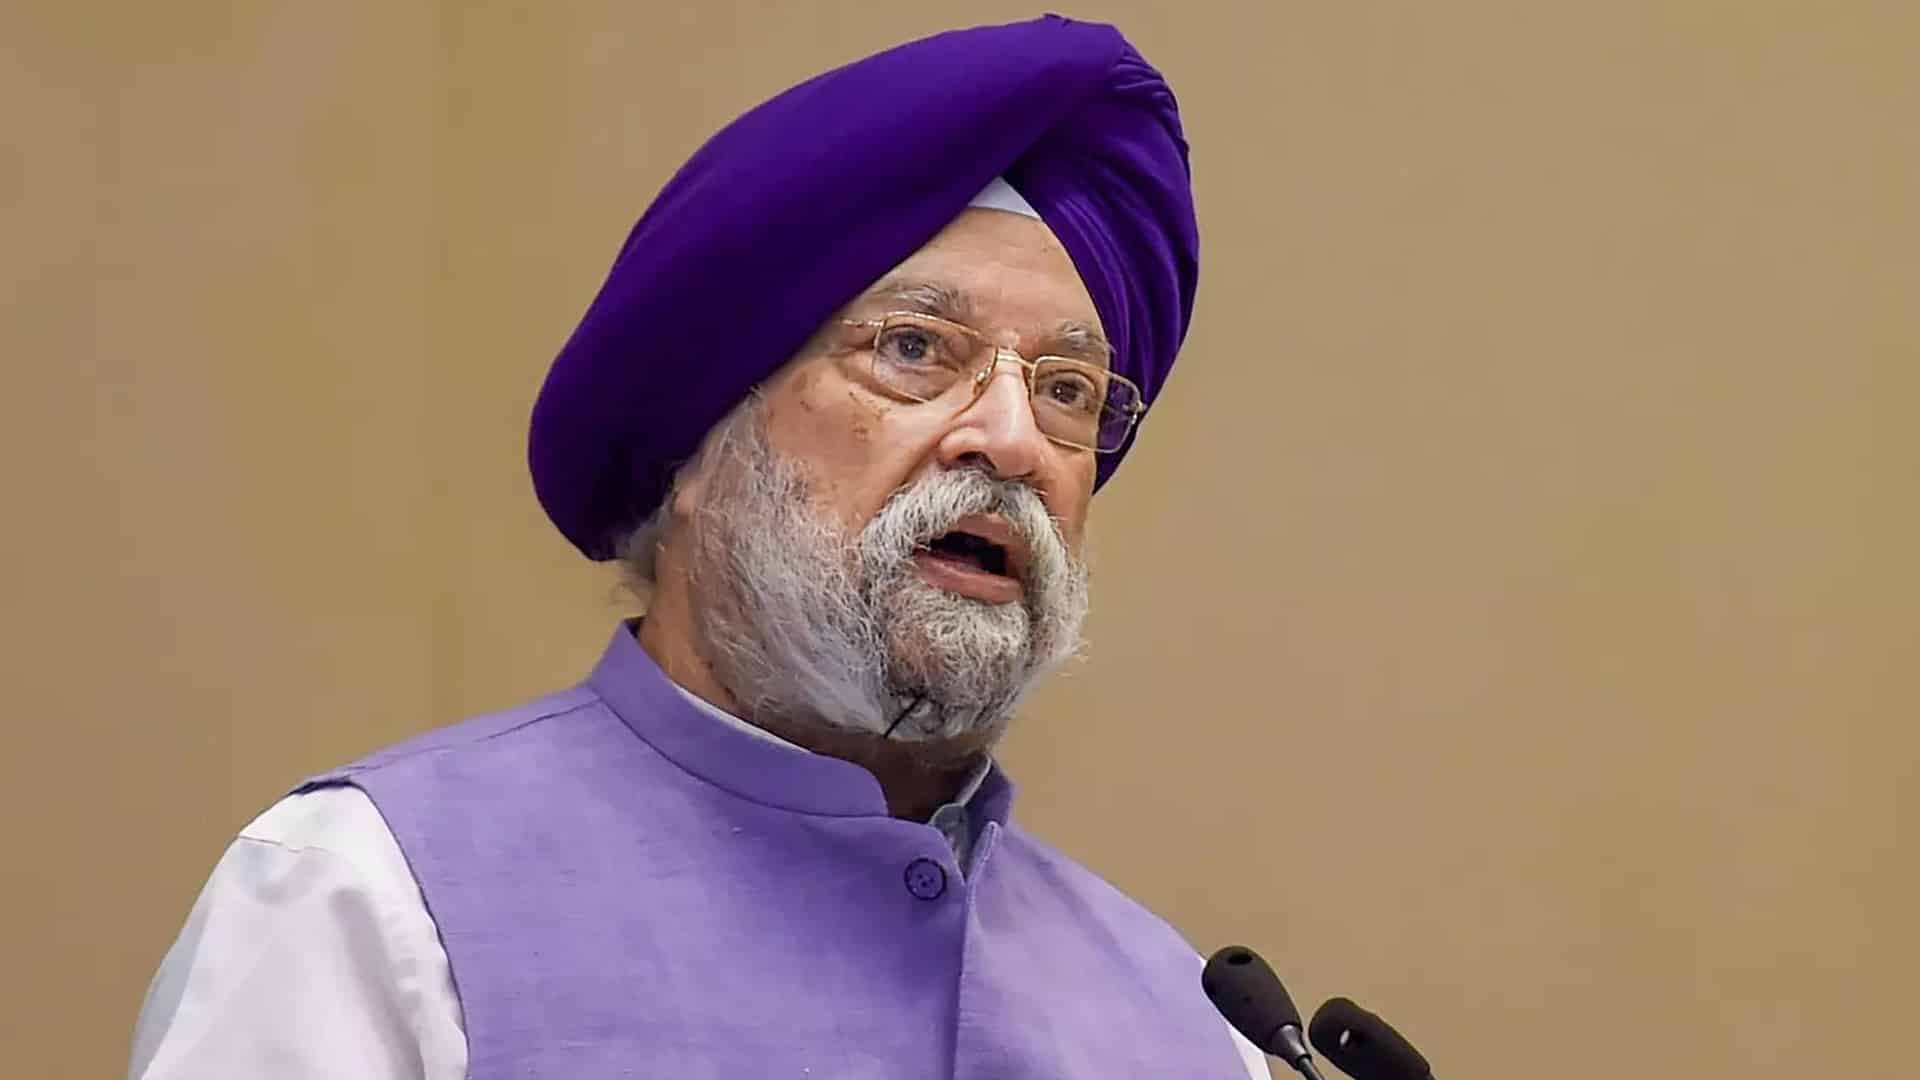 E20 fuel outlets will have pan-India presence by 2025: Hardeep Singh Puri